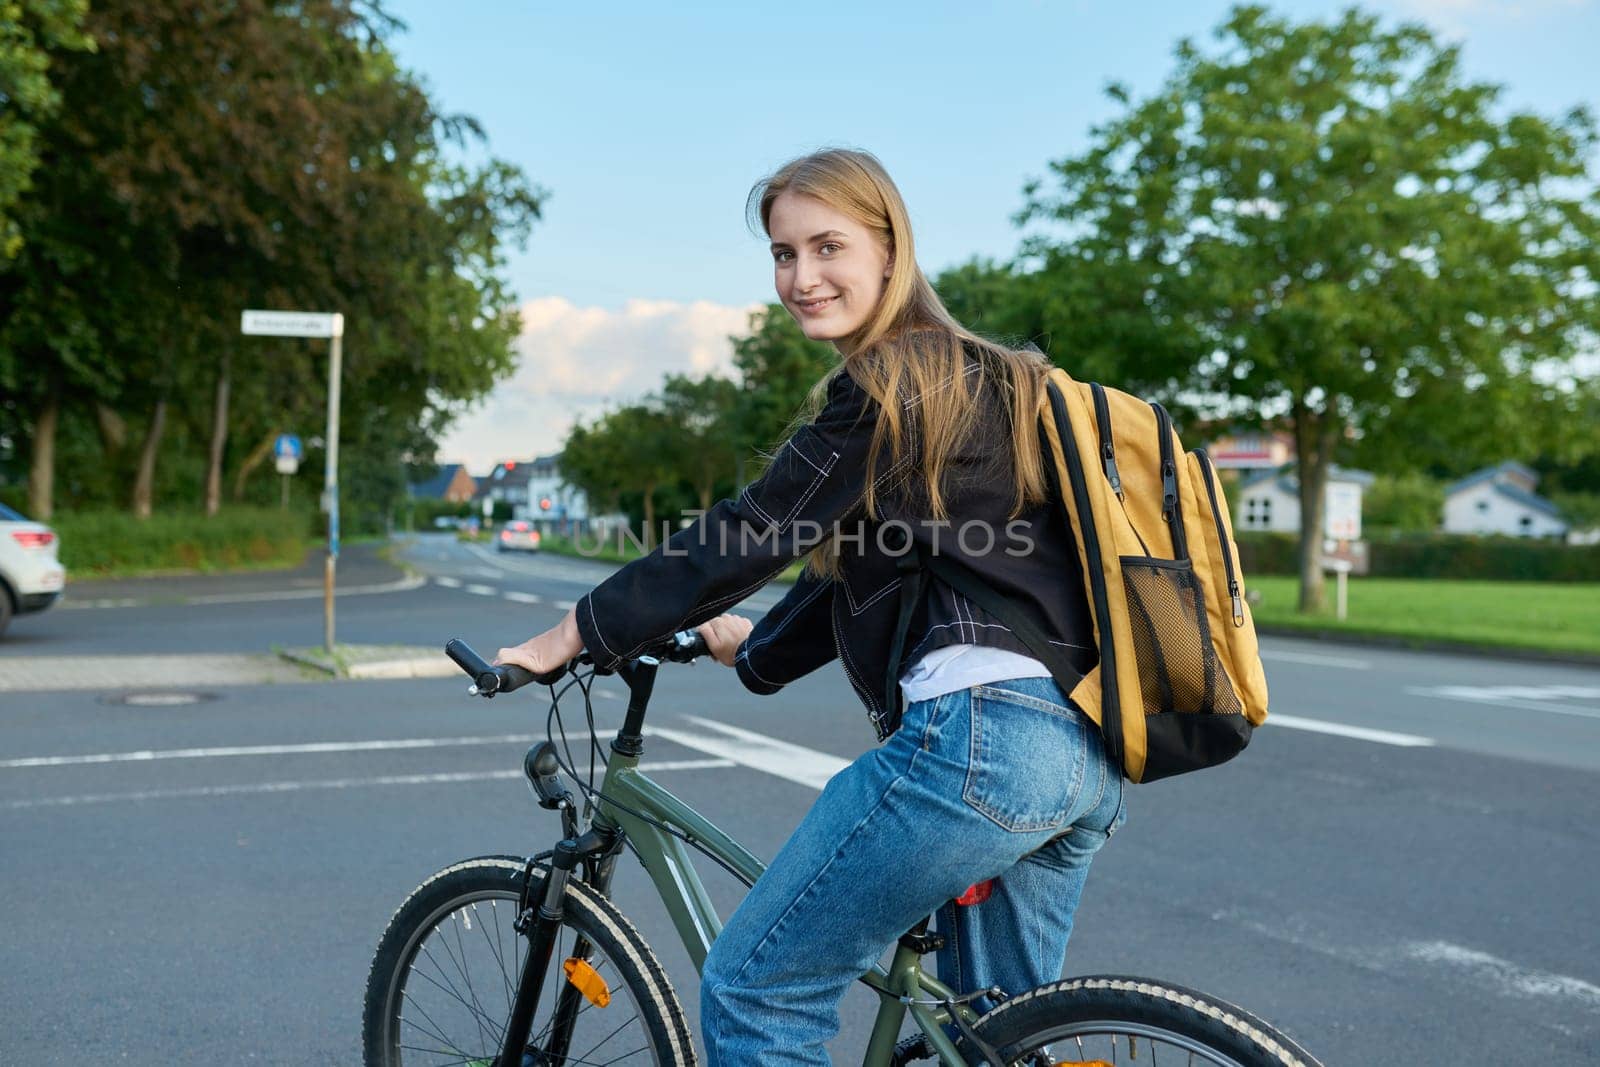 Portrait of teenage student girl with backpack on bicycle. Smiling teen female 16, 17 years old looking at camera outdoors on road. High school, lifestyle, adolescence, youth concept